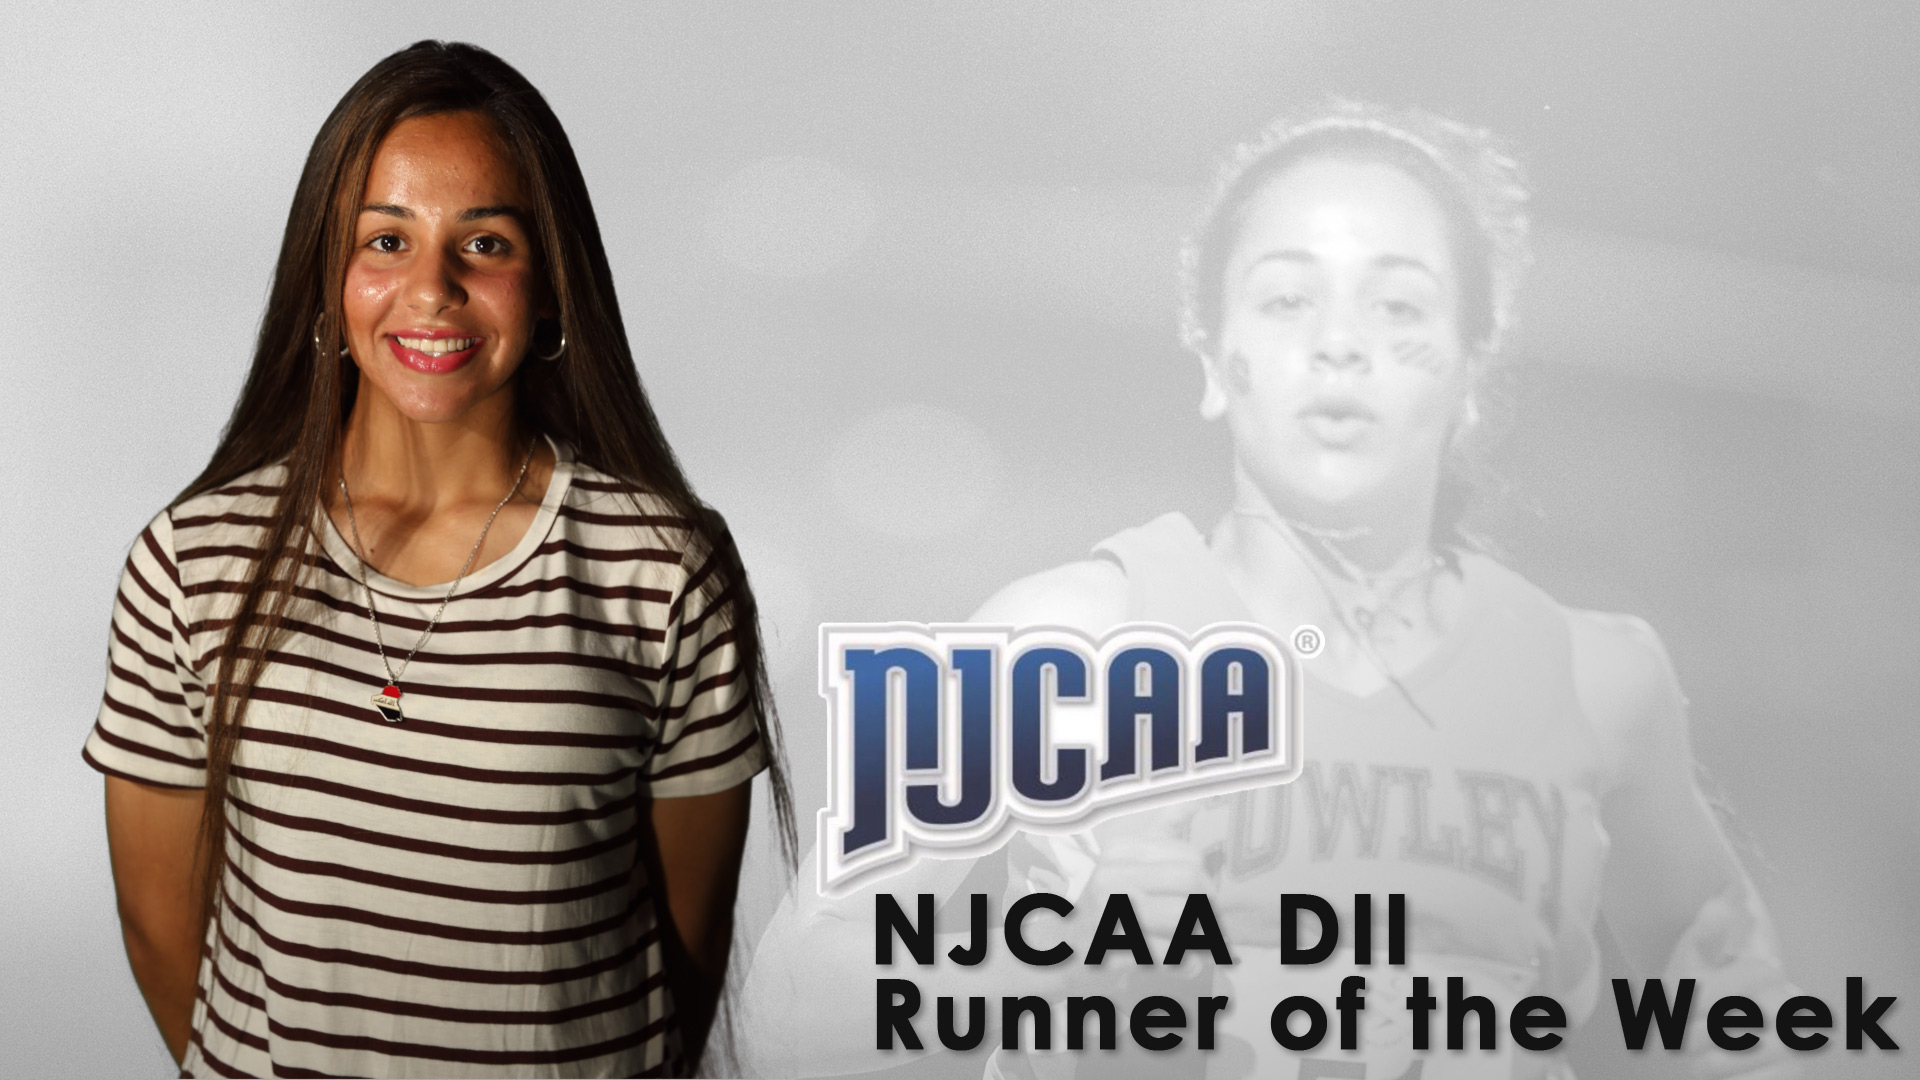 Suied earns first-ever NJCAA DII Runner of the Week Award